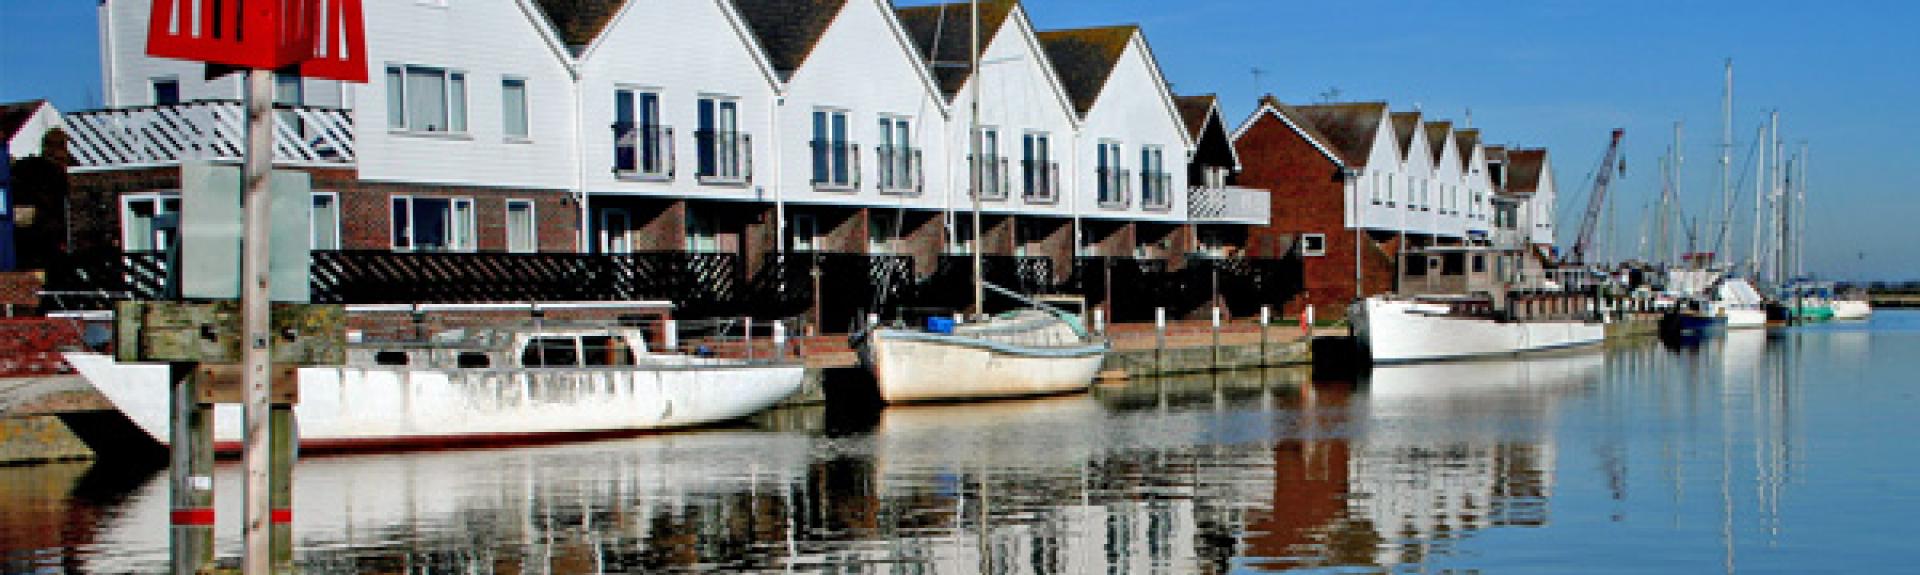 Quayside holiday apartment in Rye overlooks small craft moored to the waterfront at high tide